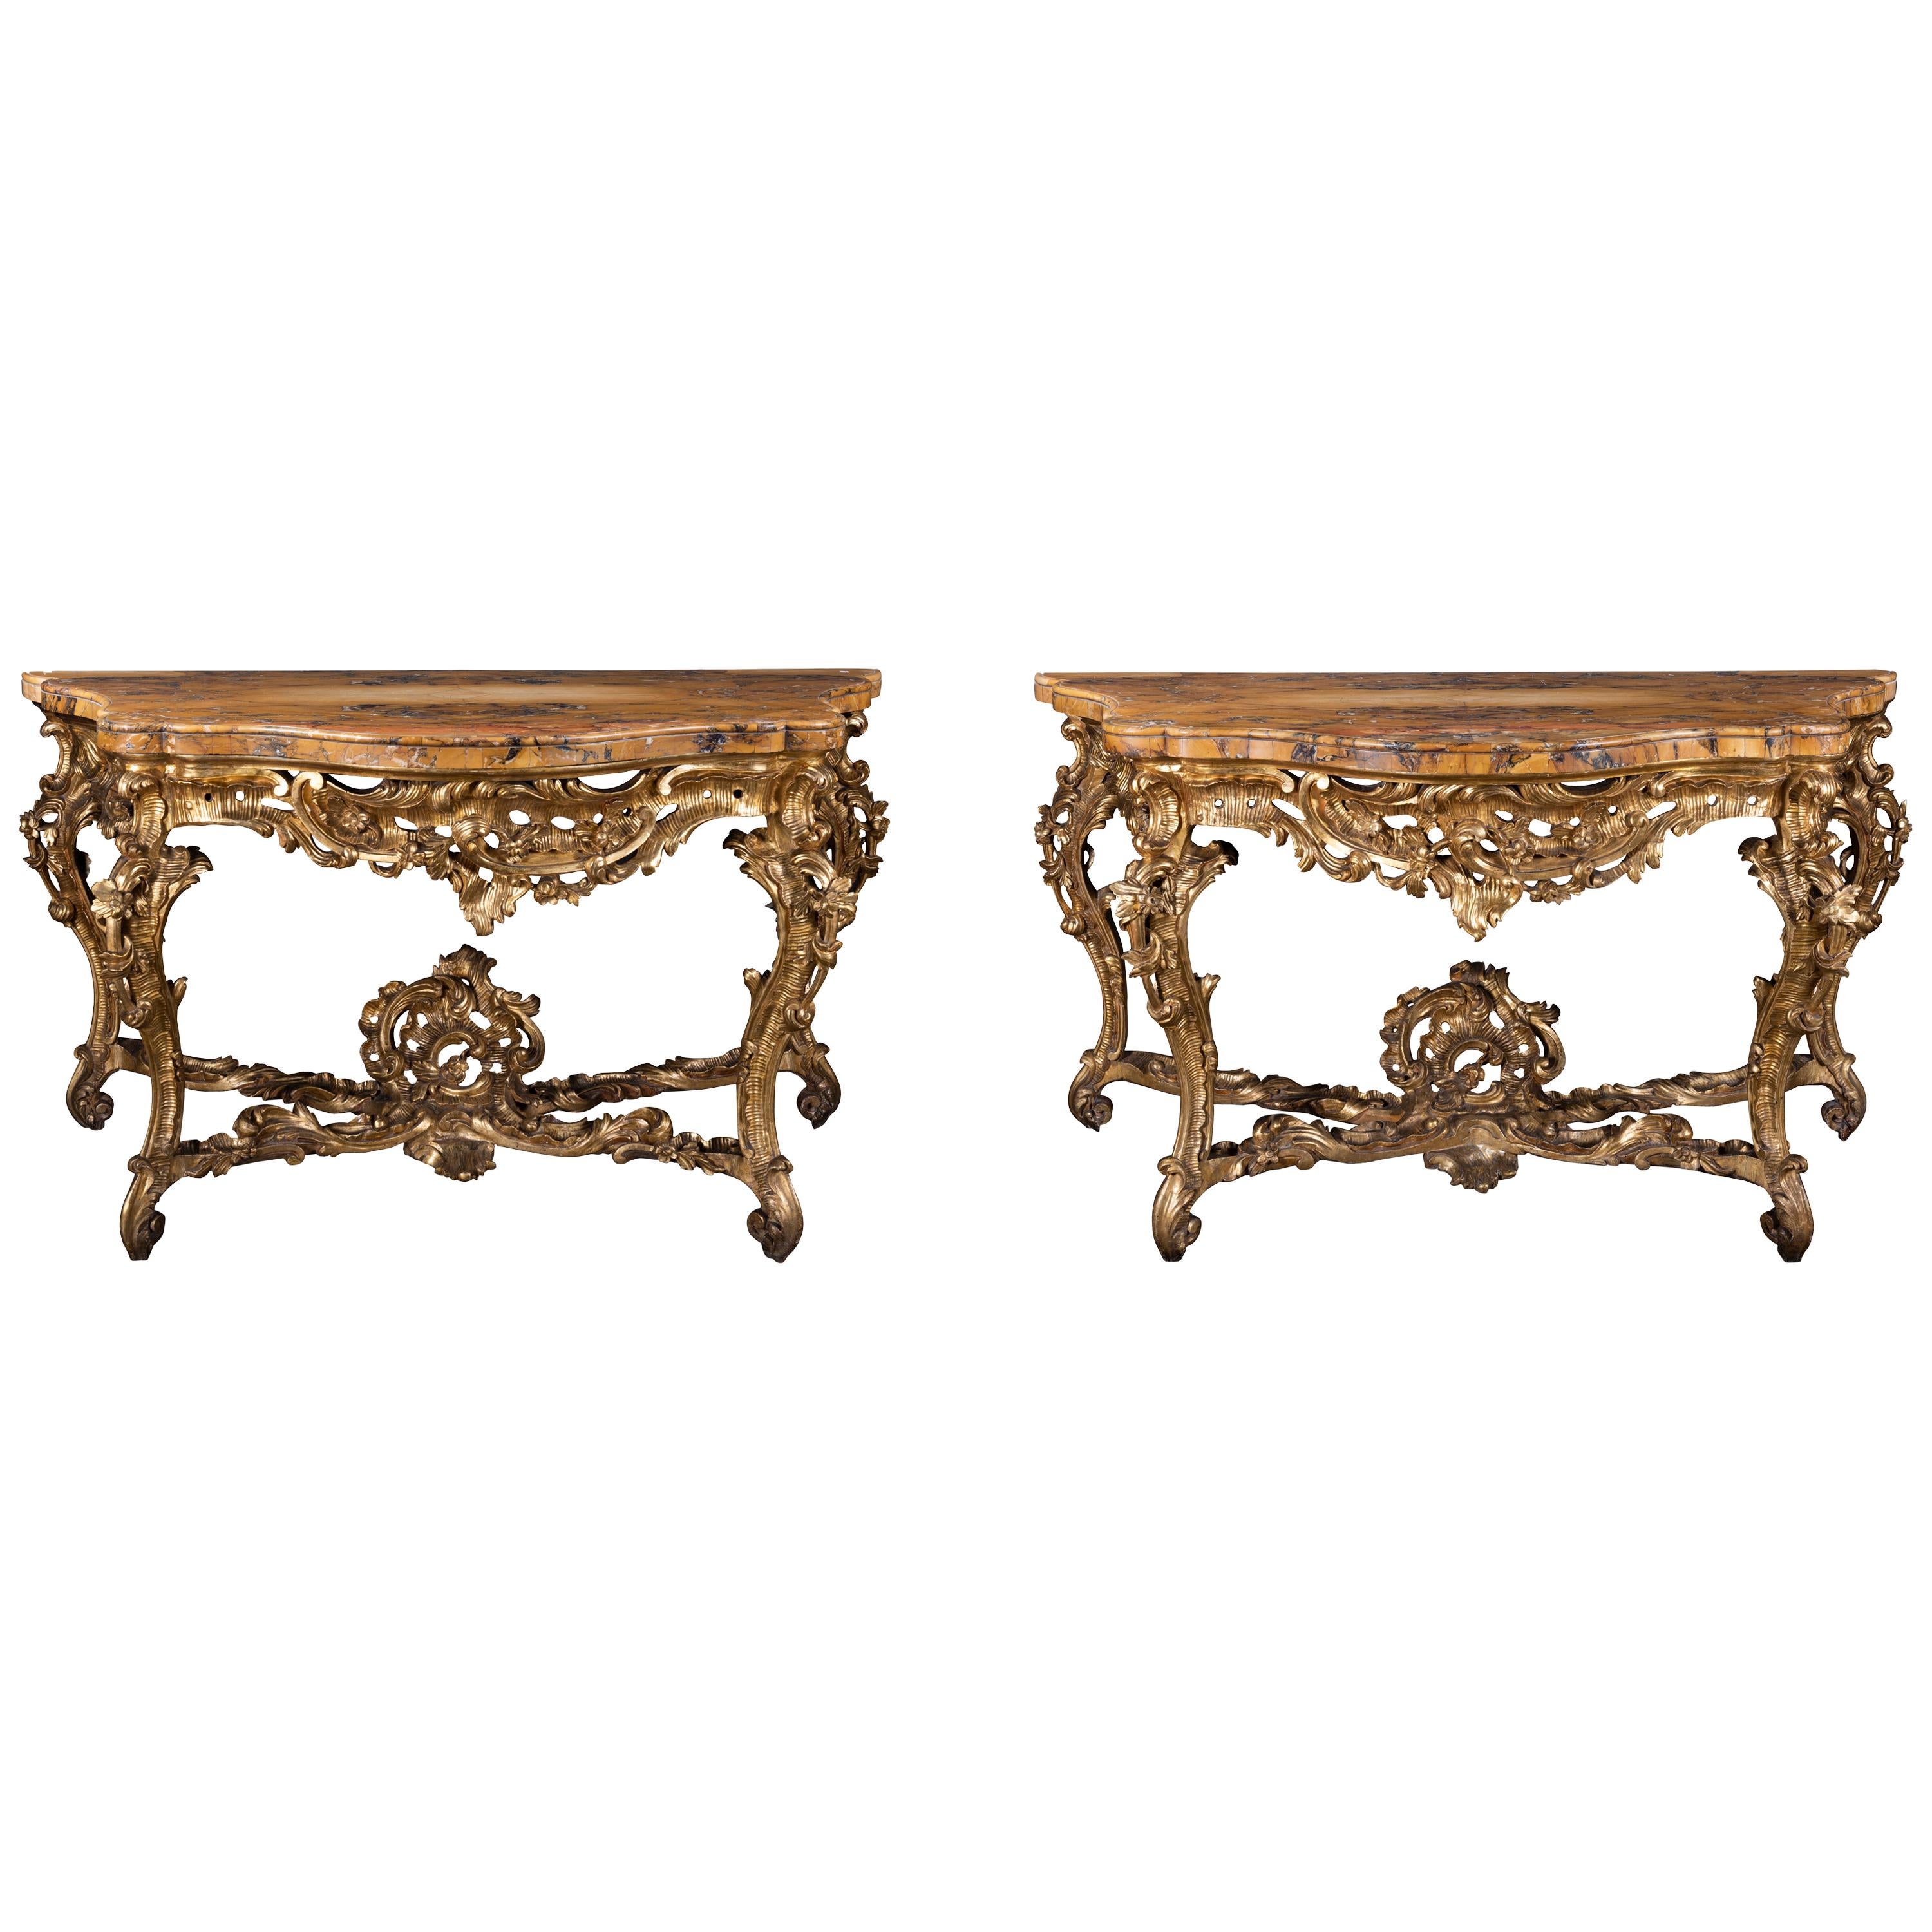 A Pair of Late 18th Century Siena Marble and Giltwood Consoles For Sale